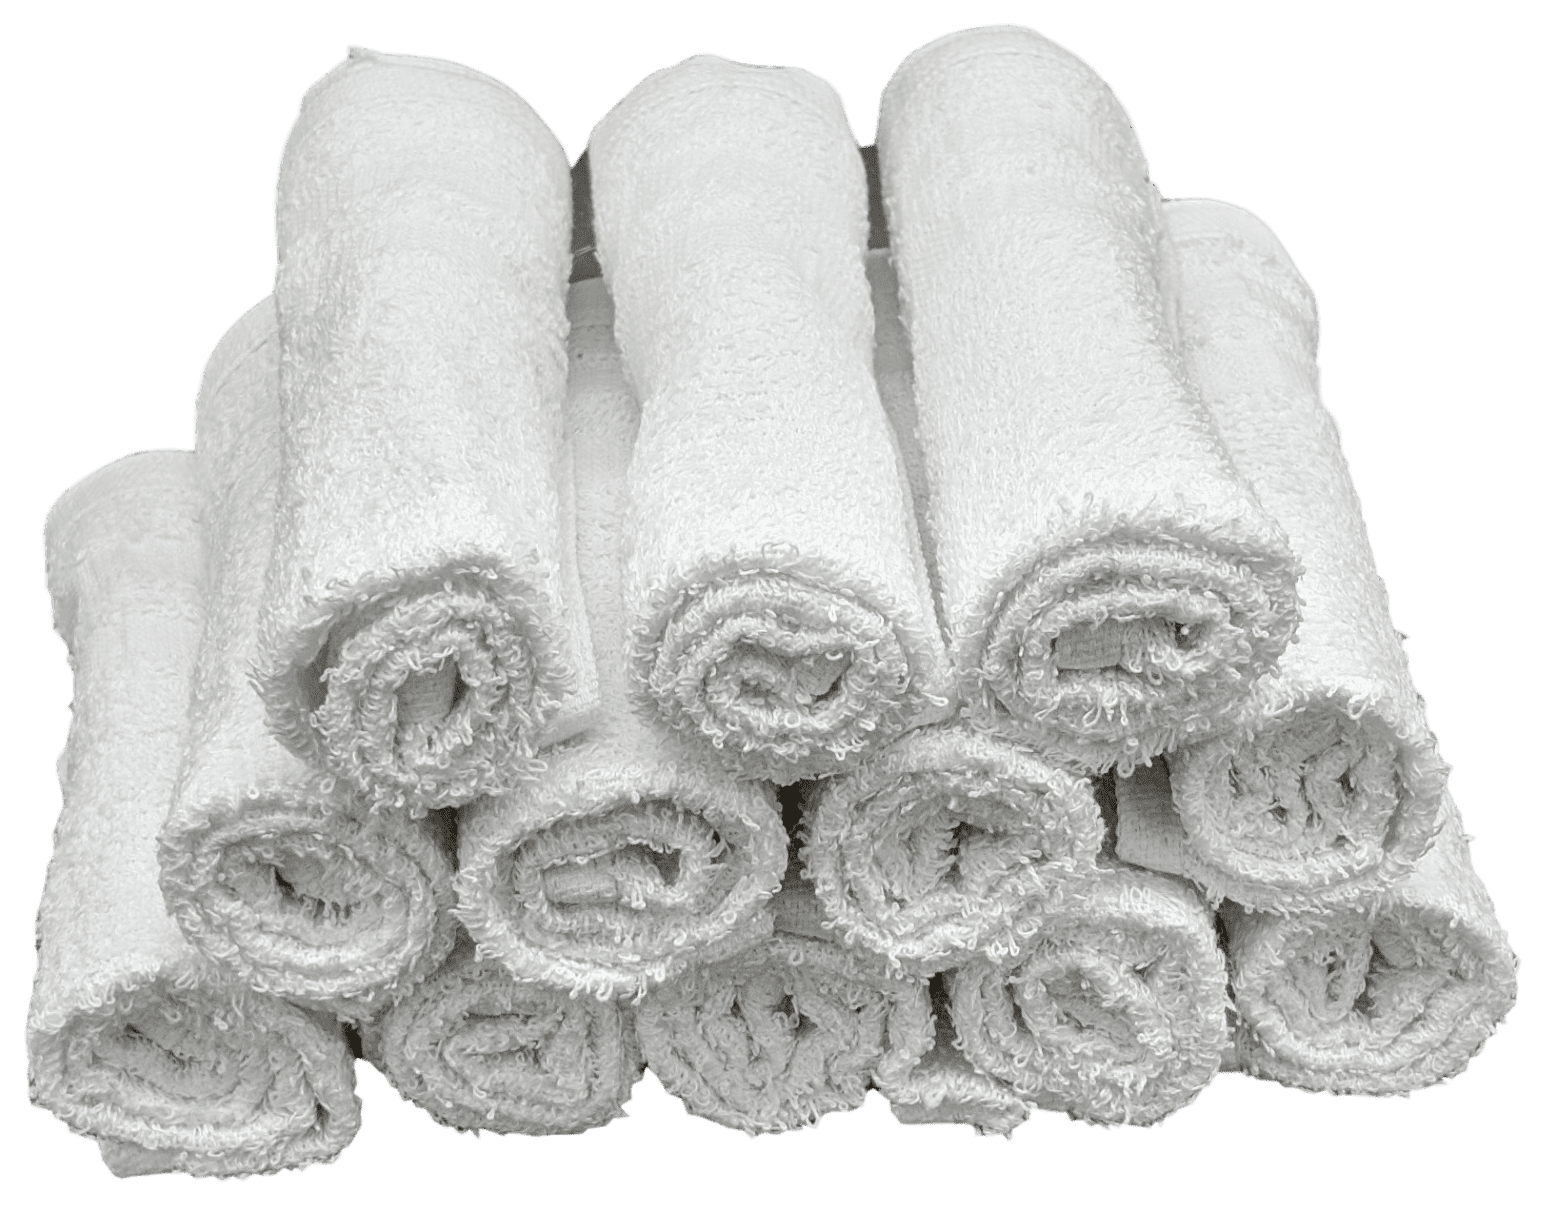 48 Pack - 12 x 12 White Cotton Value Washcloth Rags | Spa Painting Cleaning  Face - 1 LB Per Dozen